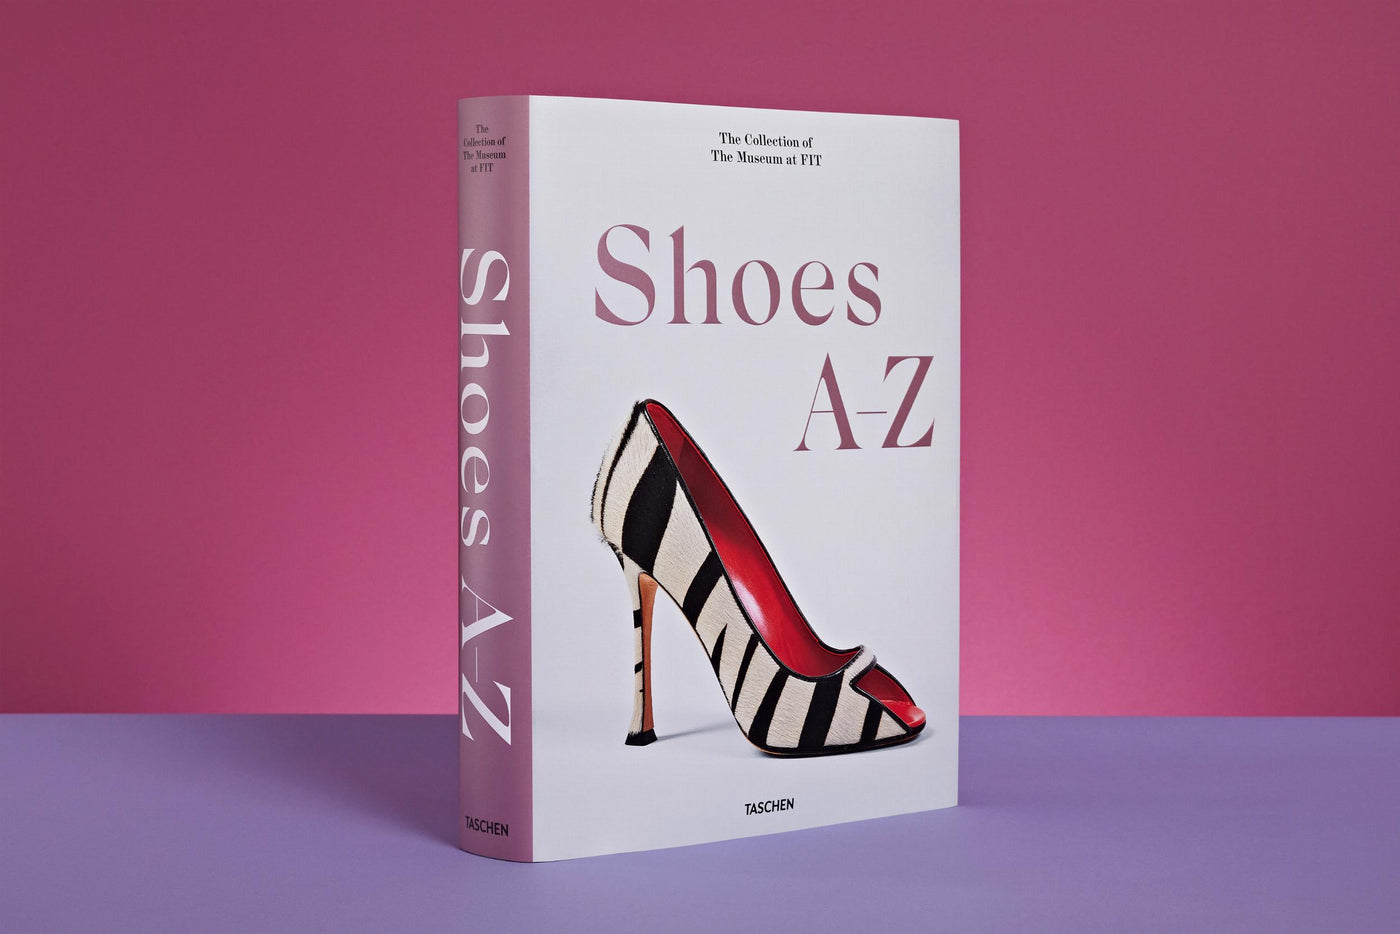 Shoes A-Z: The Collection Of The Museum At FIT